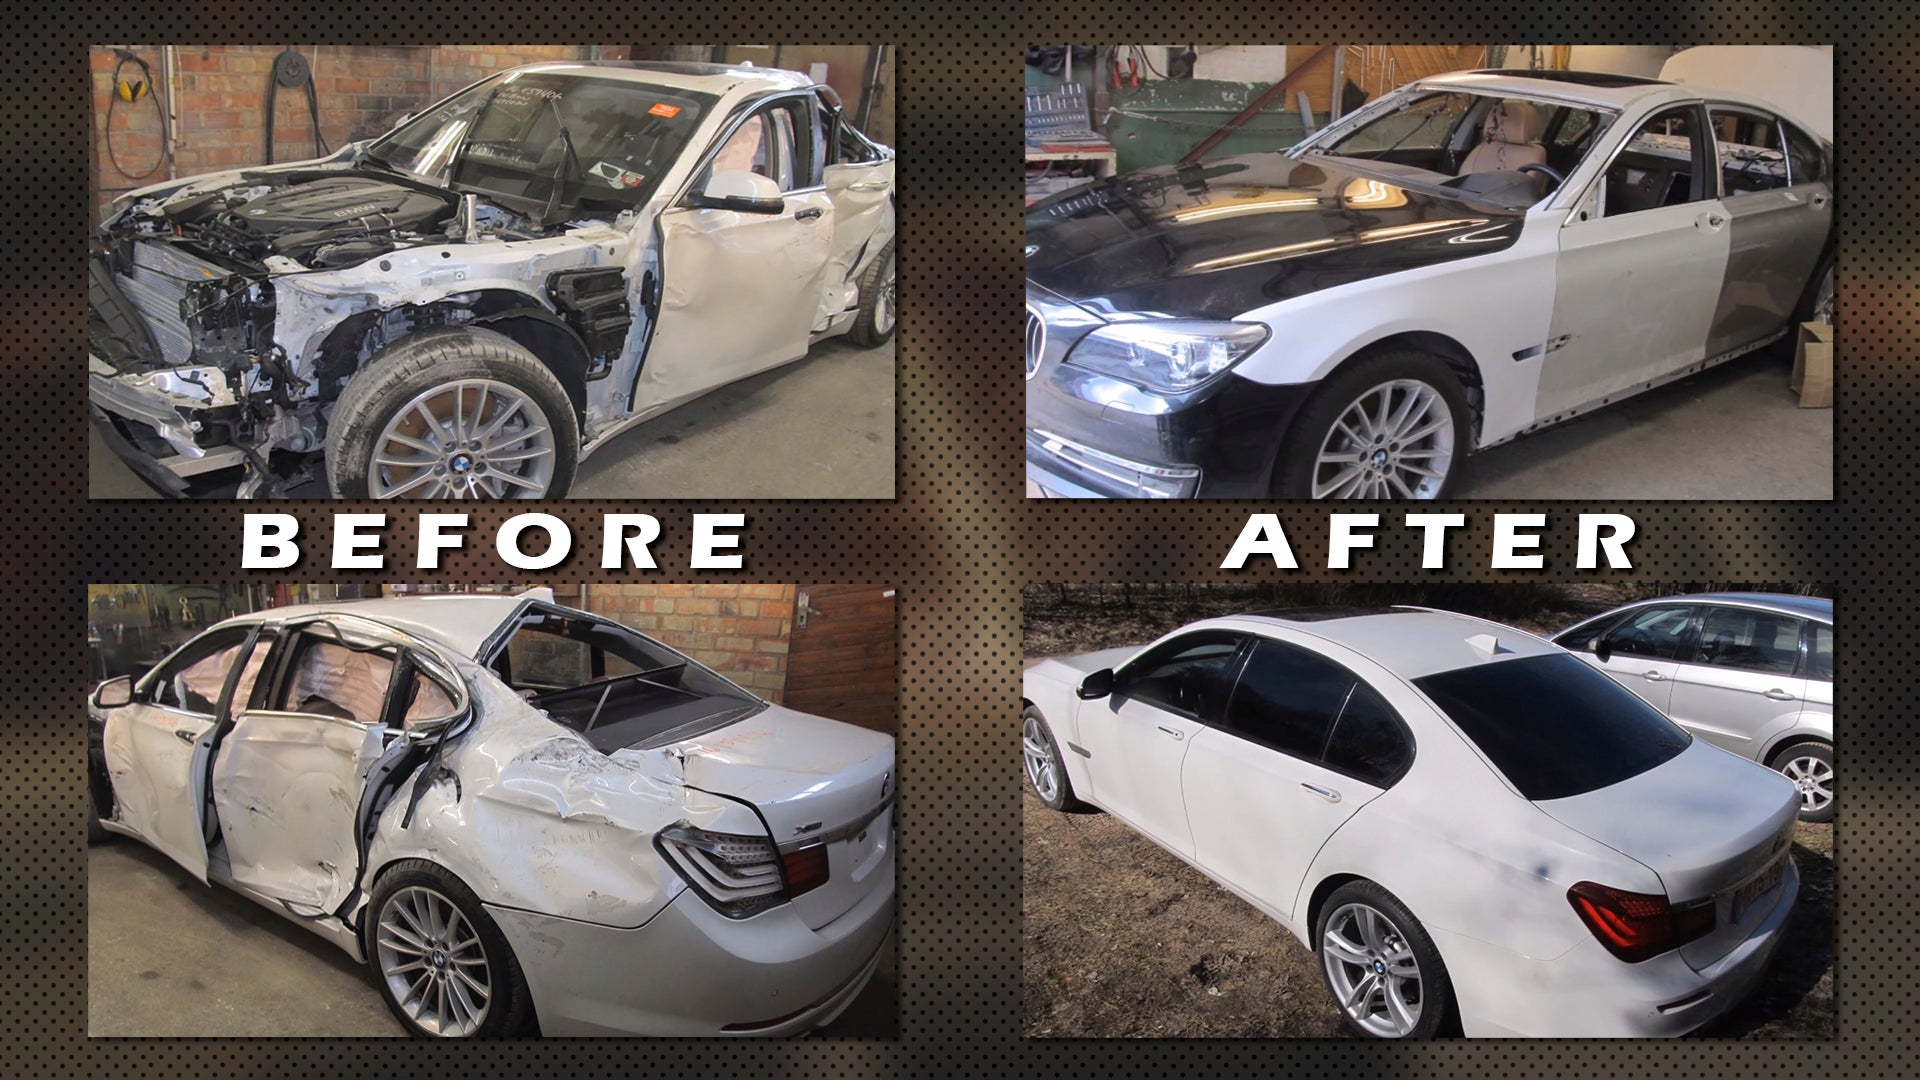 Watch This Russian Body Shop Completely Repair a Totaled BMW 7-Series